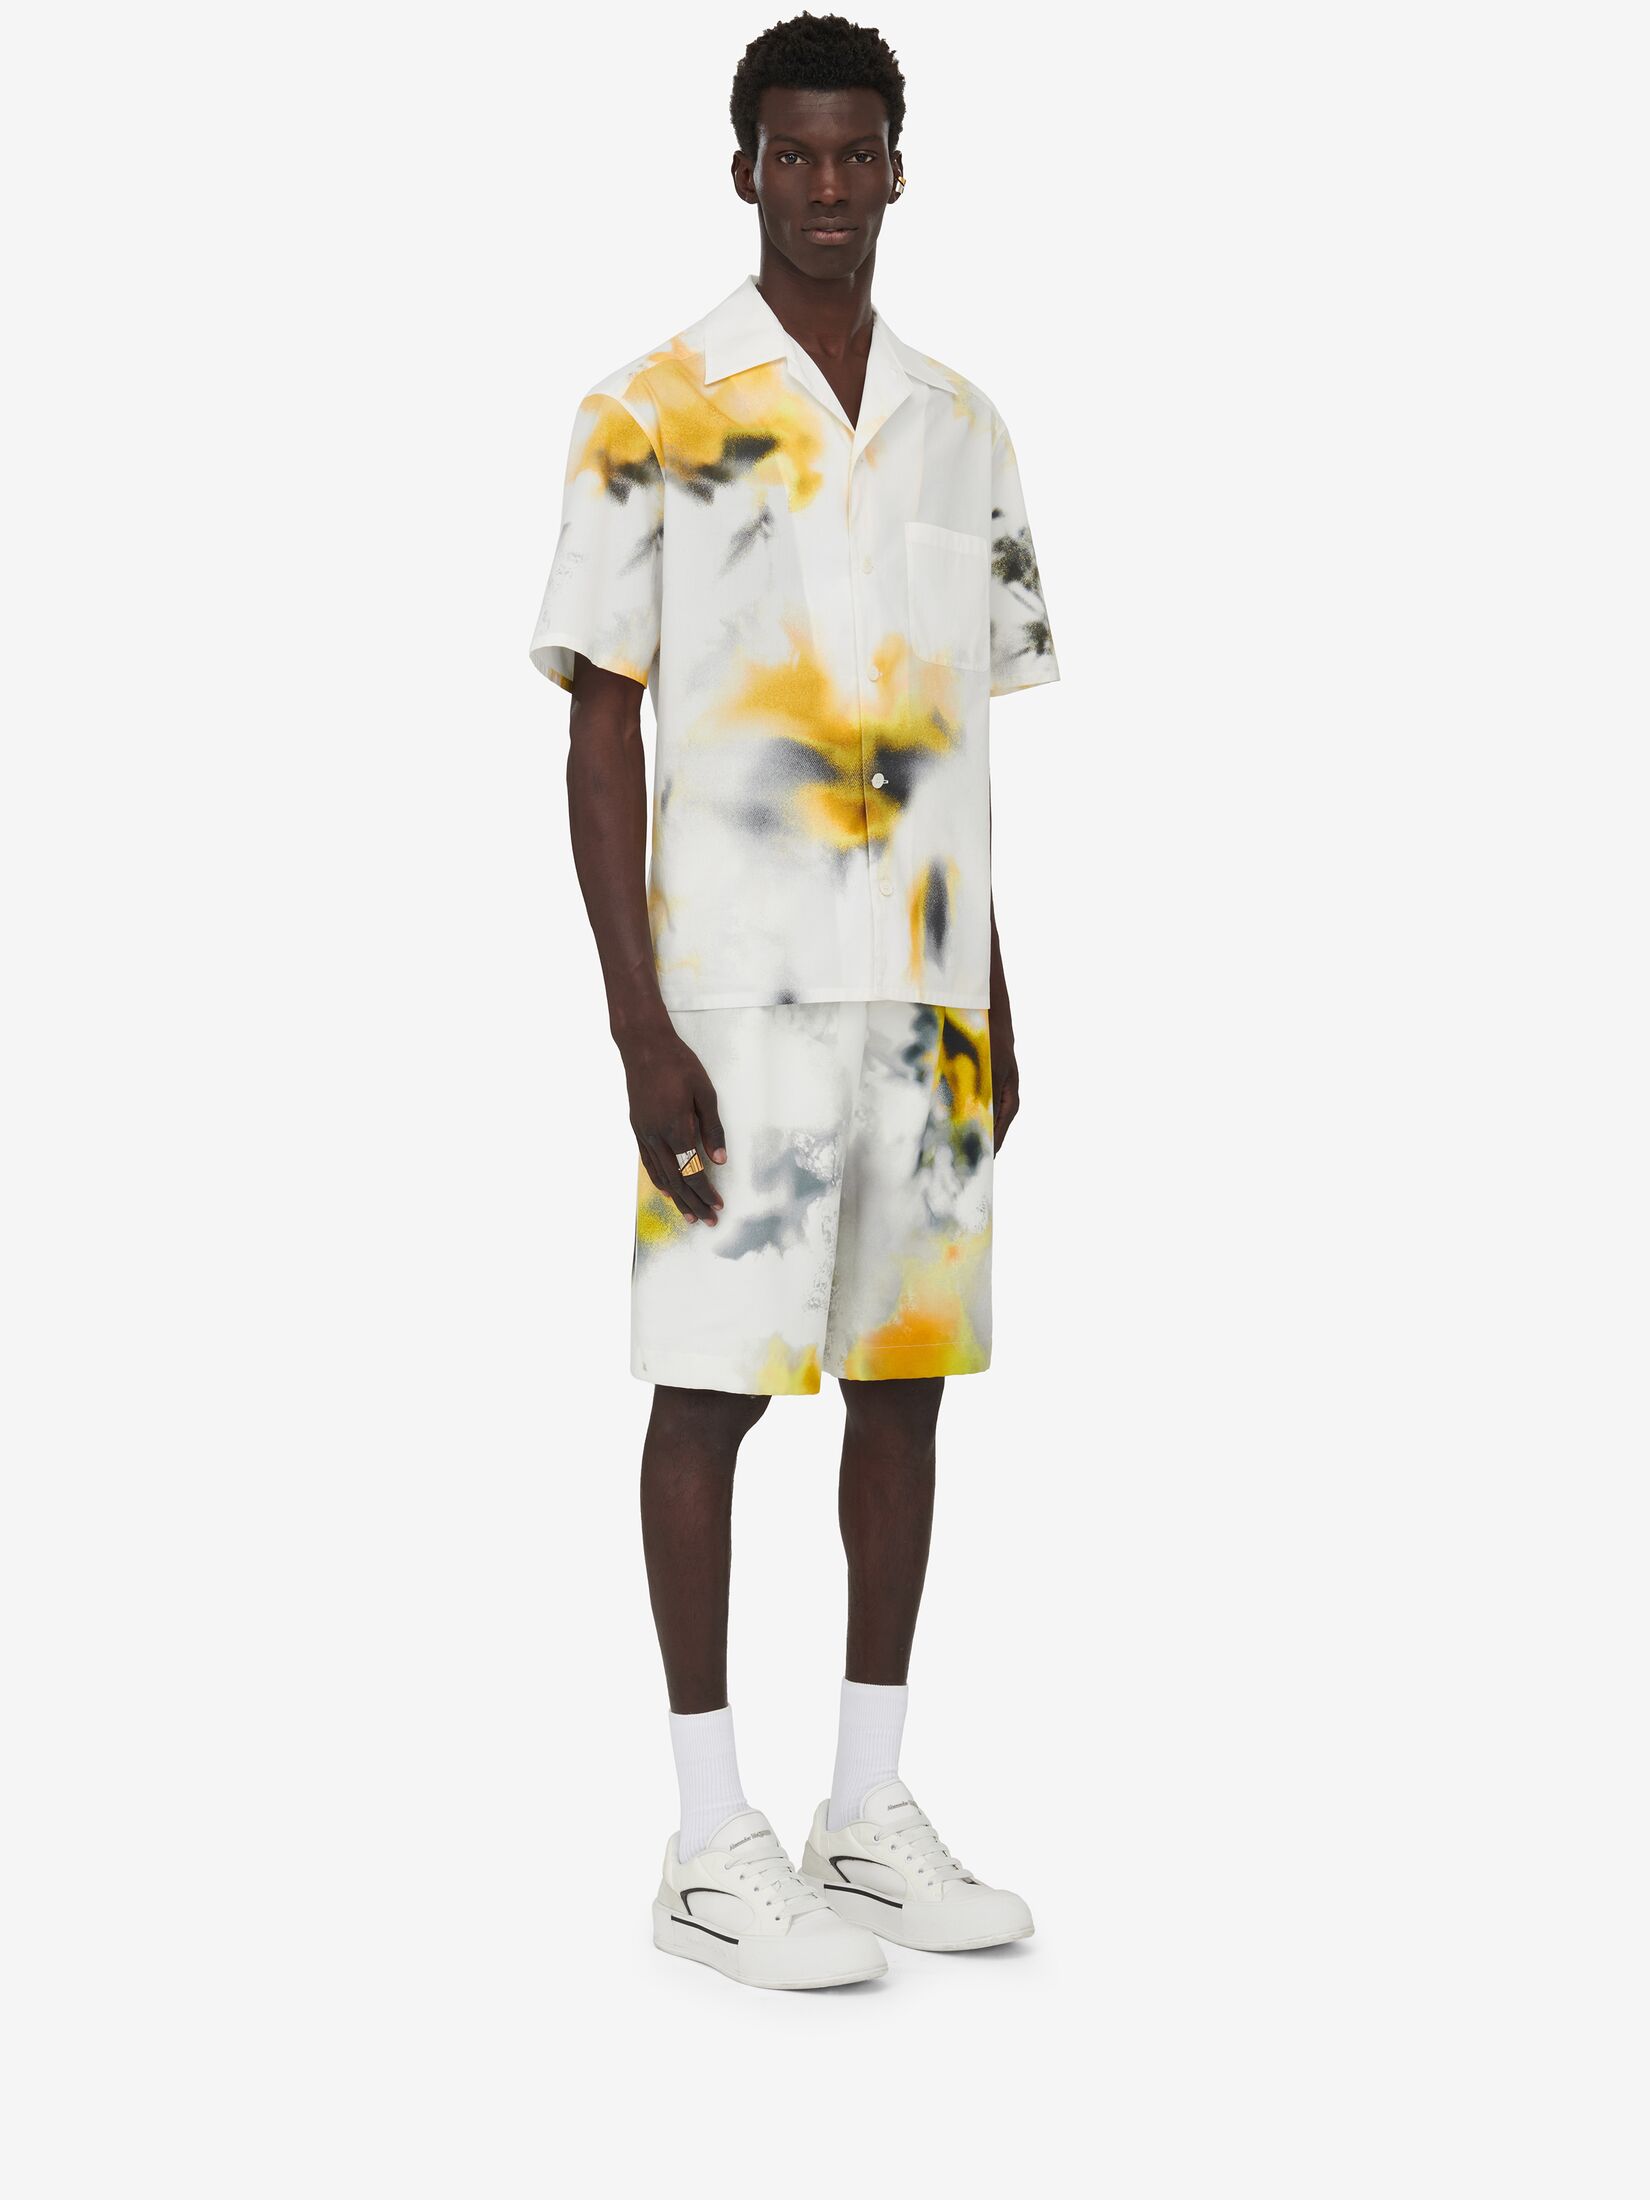 Obscured Flower Bowling Shirt